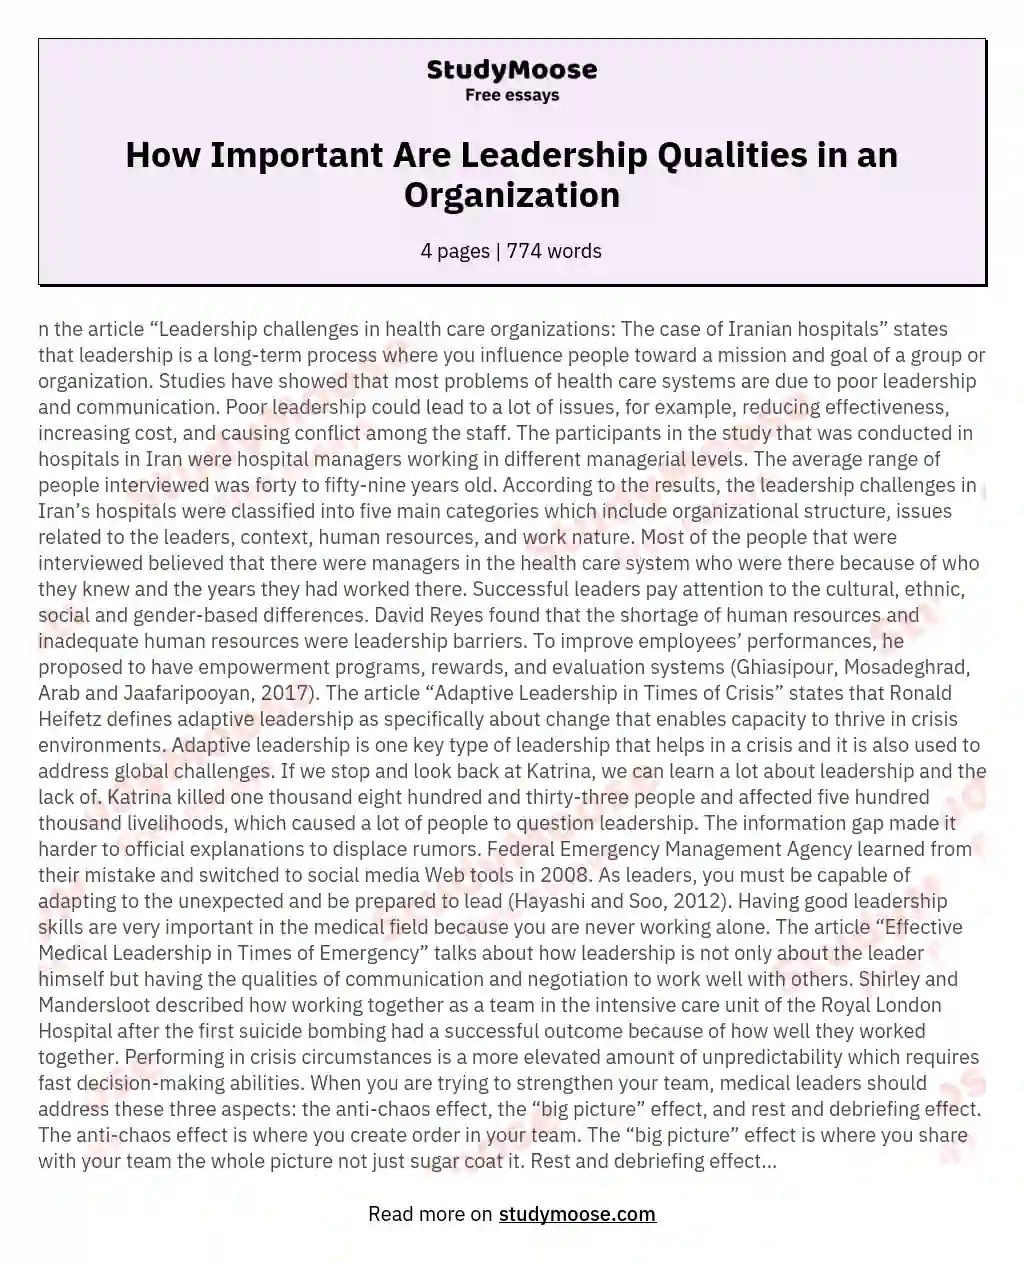 How Important Are Leadership Qualities in an Organization essay